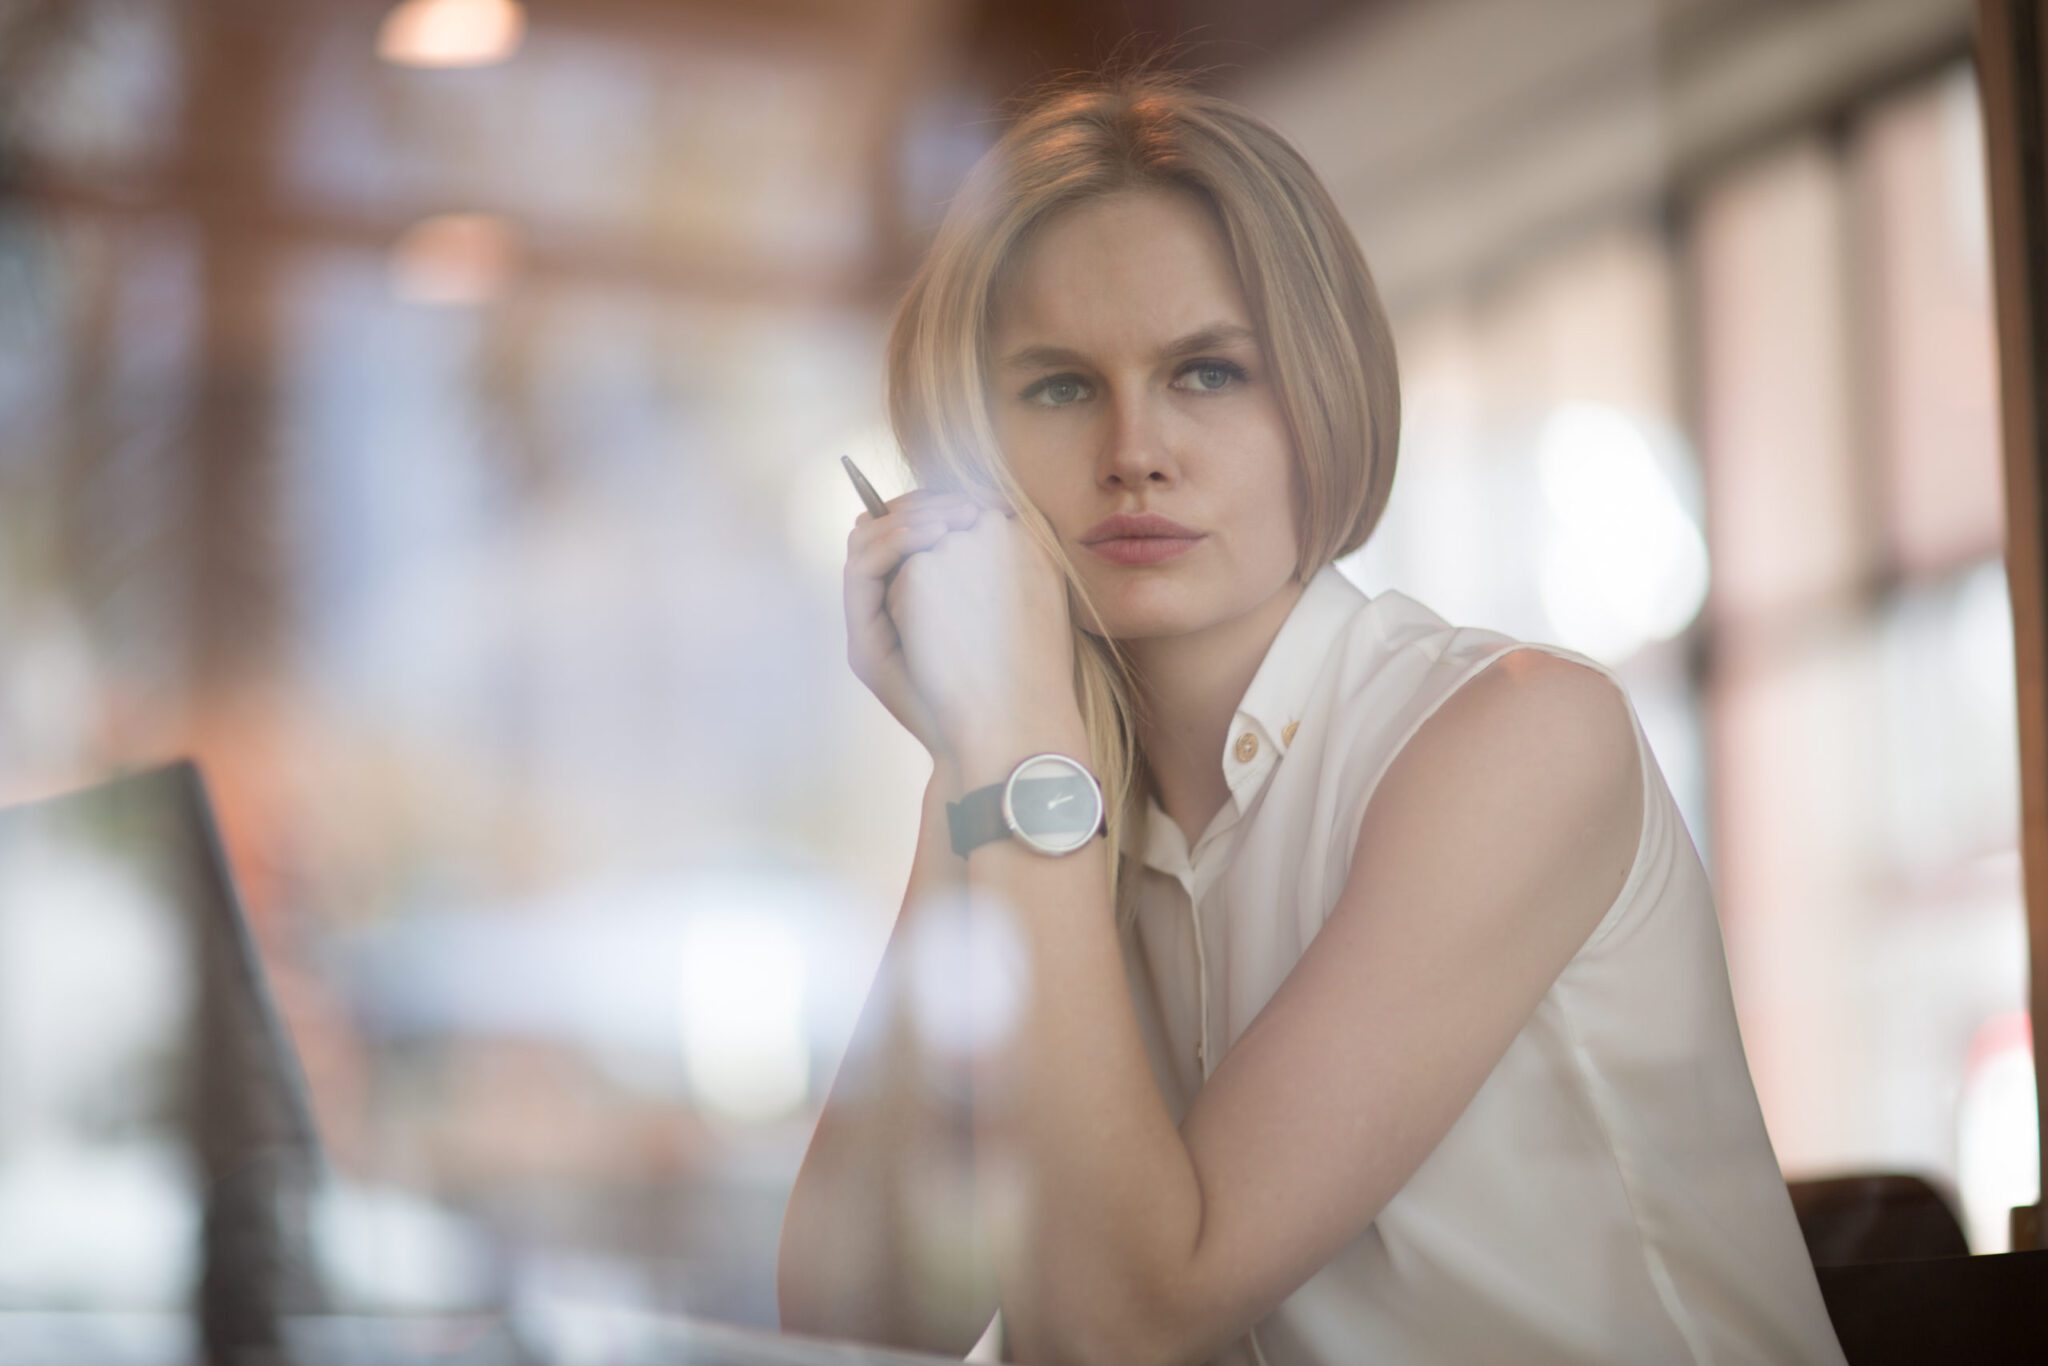 A stock photo through the glass of a woman at work looking contemplative. Women experience imposter syndrome just as much if not more than men.